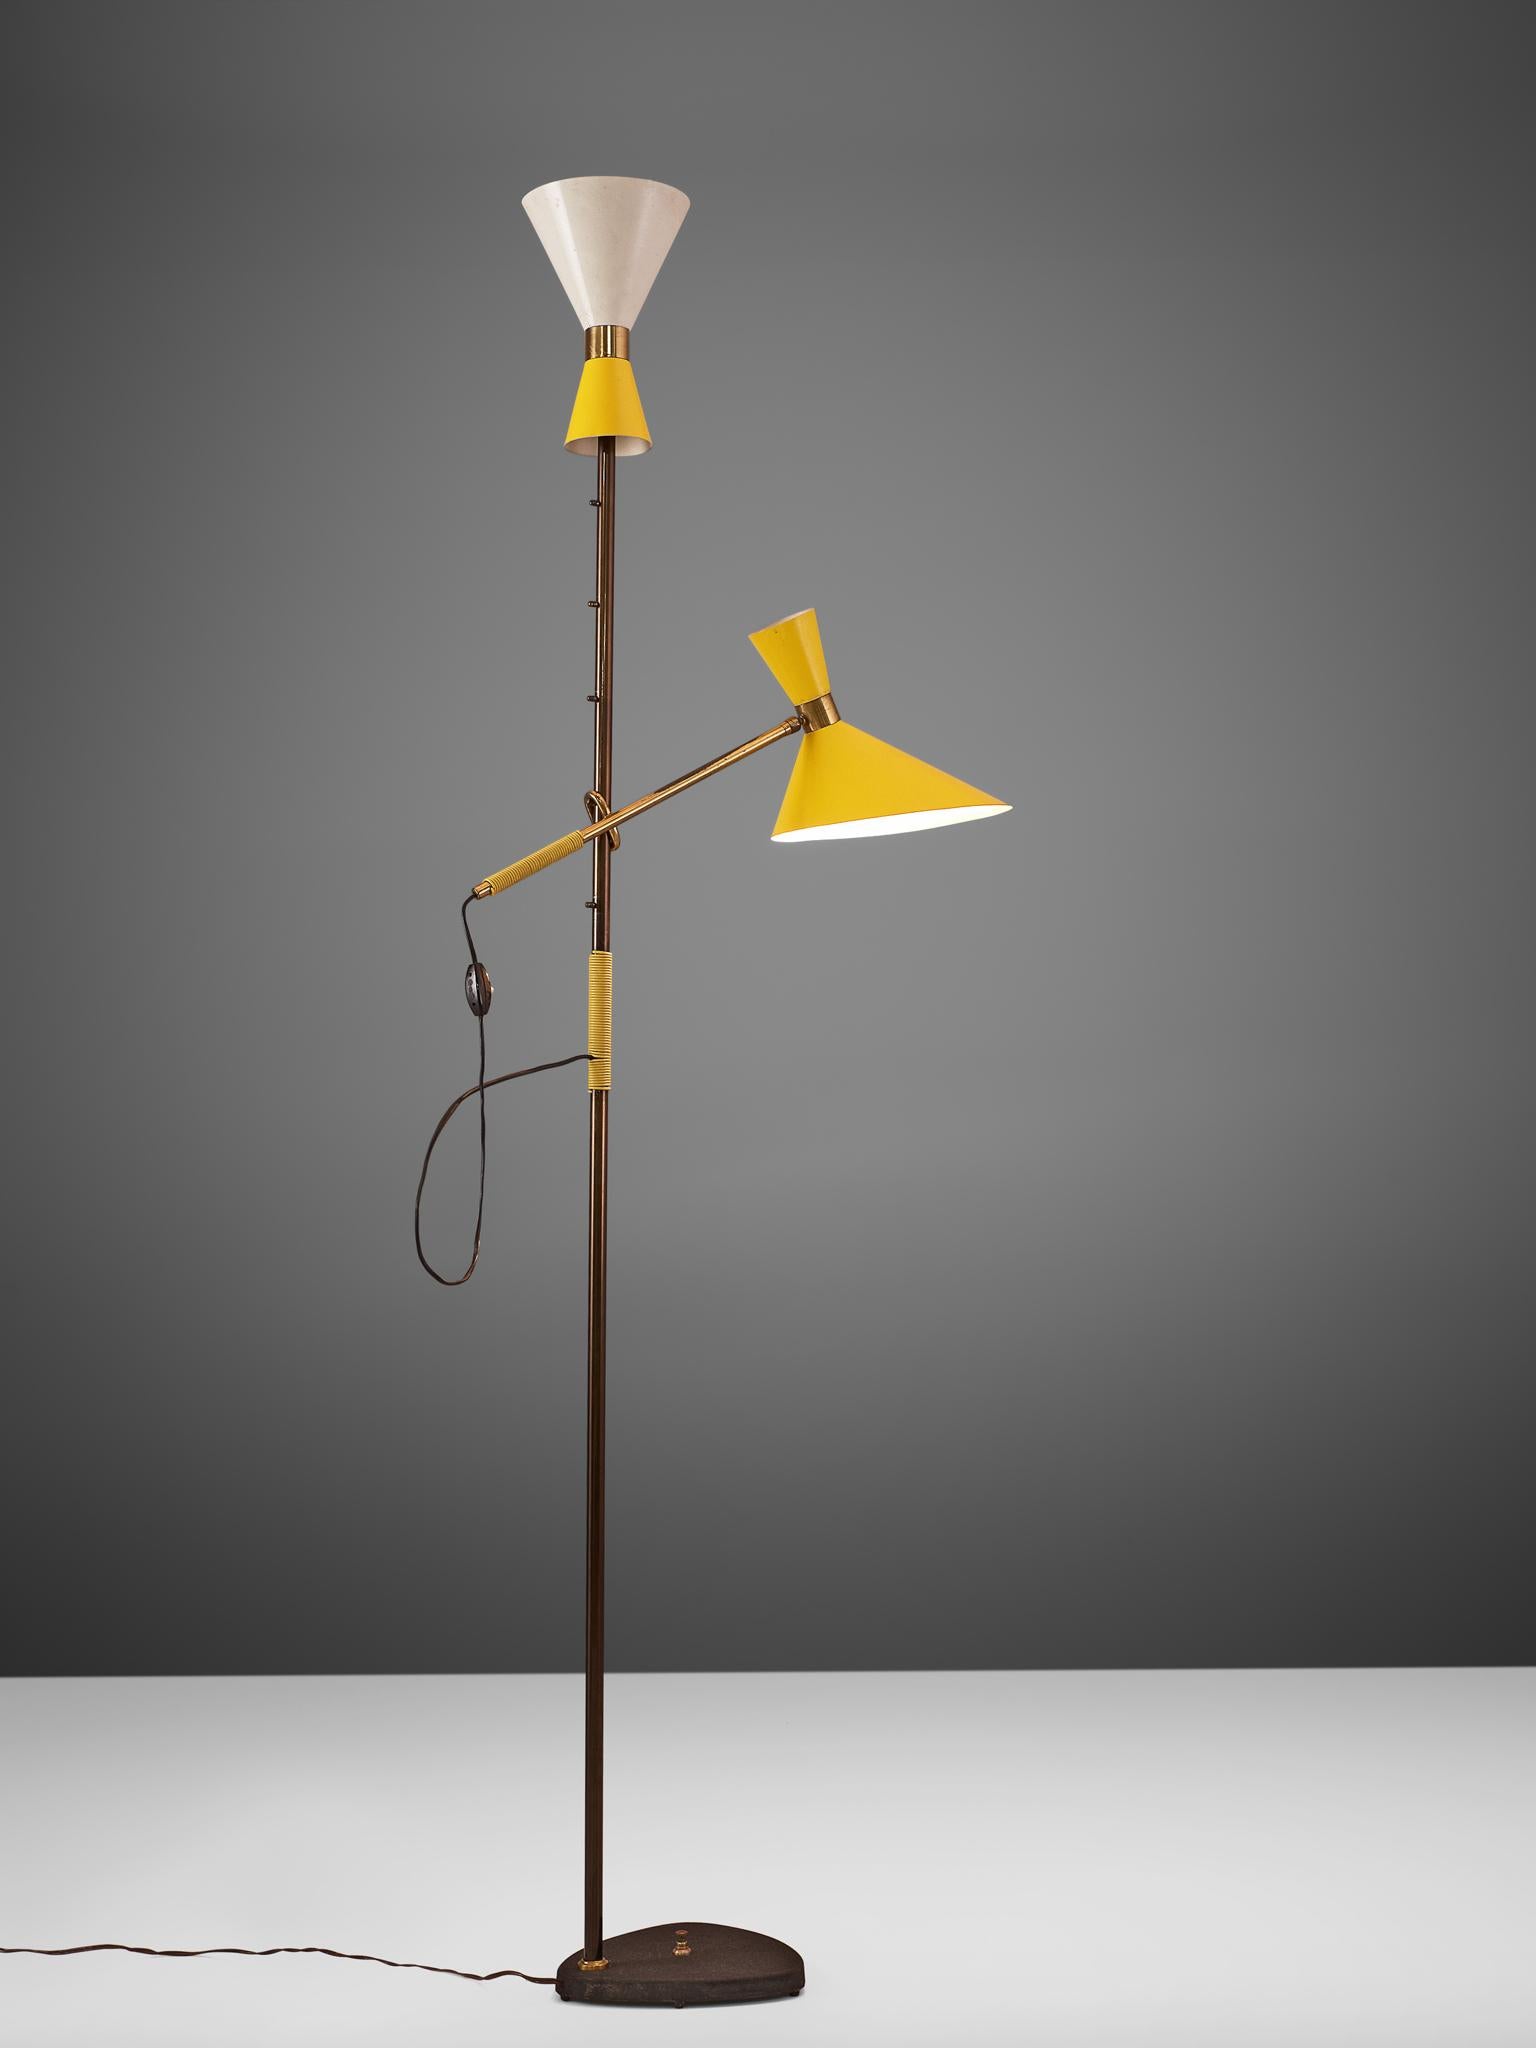 J.T. Kalmar, floor lamp 'Pelikan,' metal, fabric, green marble, brass, Austria, 1950s.

Slender floor lamp with chracteristic and inventive adjustable height mechanism. The base holds one shade, that is faced towards the ceiling. The other shade